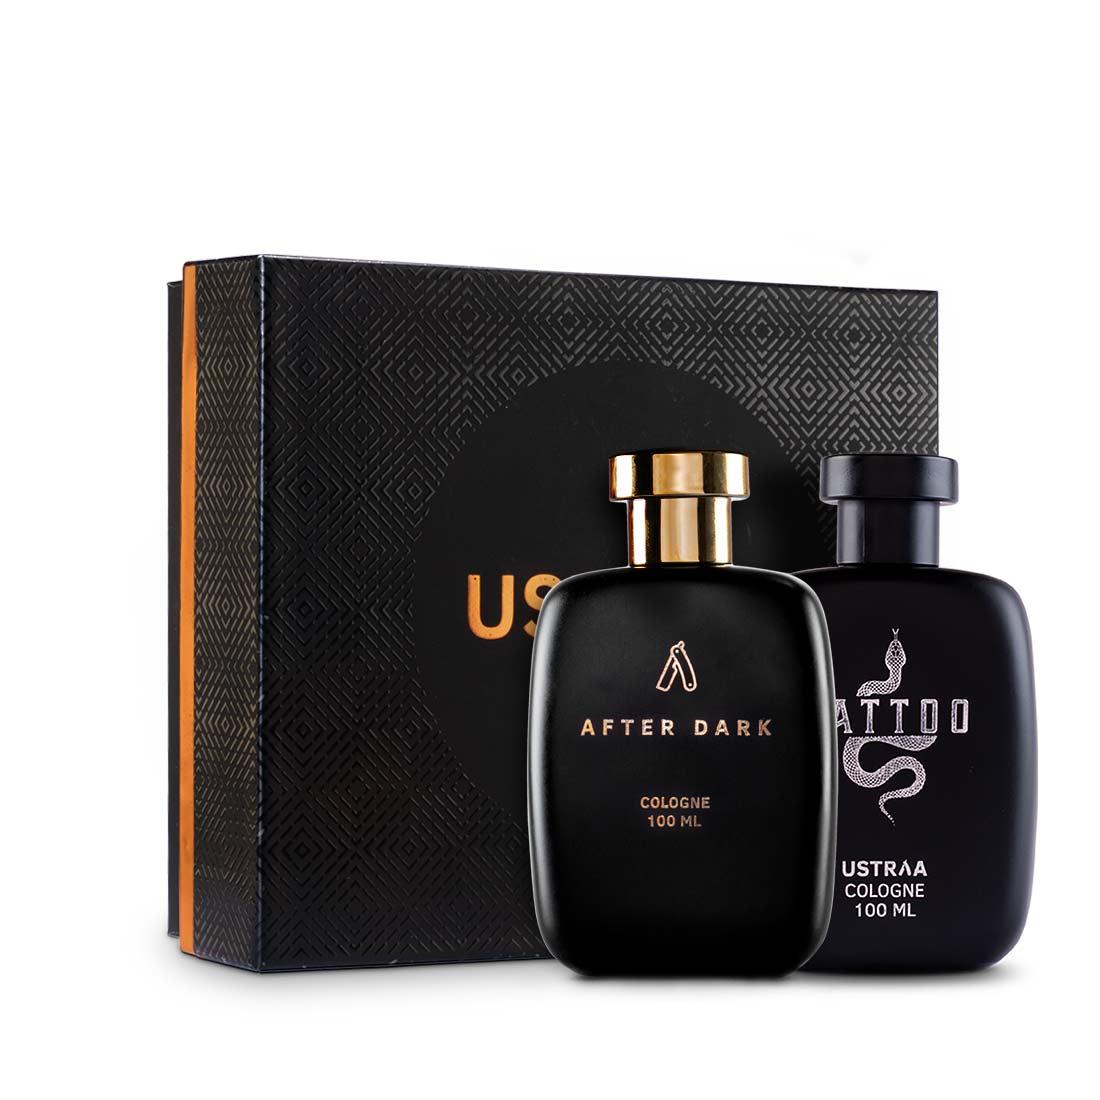 Fragrance Gift Box - Tattoo Cologne 100ml & After Dark Cologne 100ml